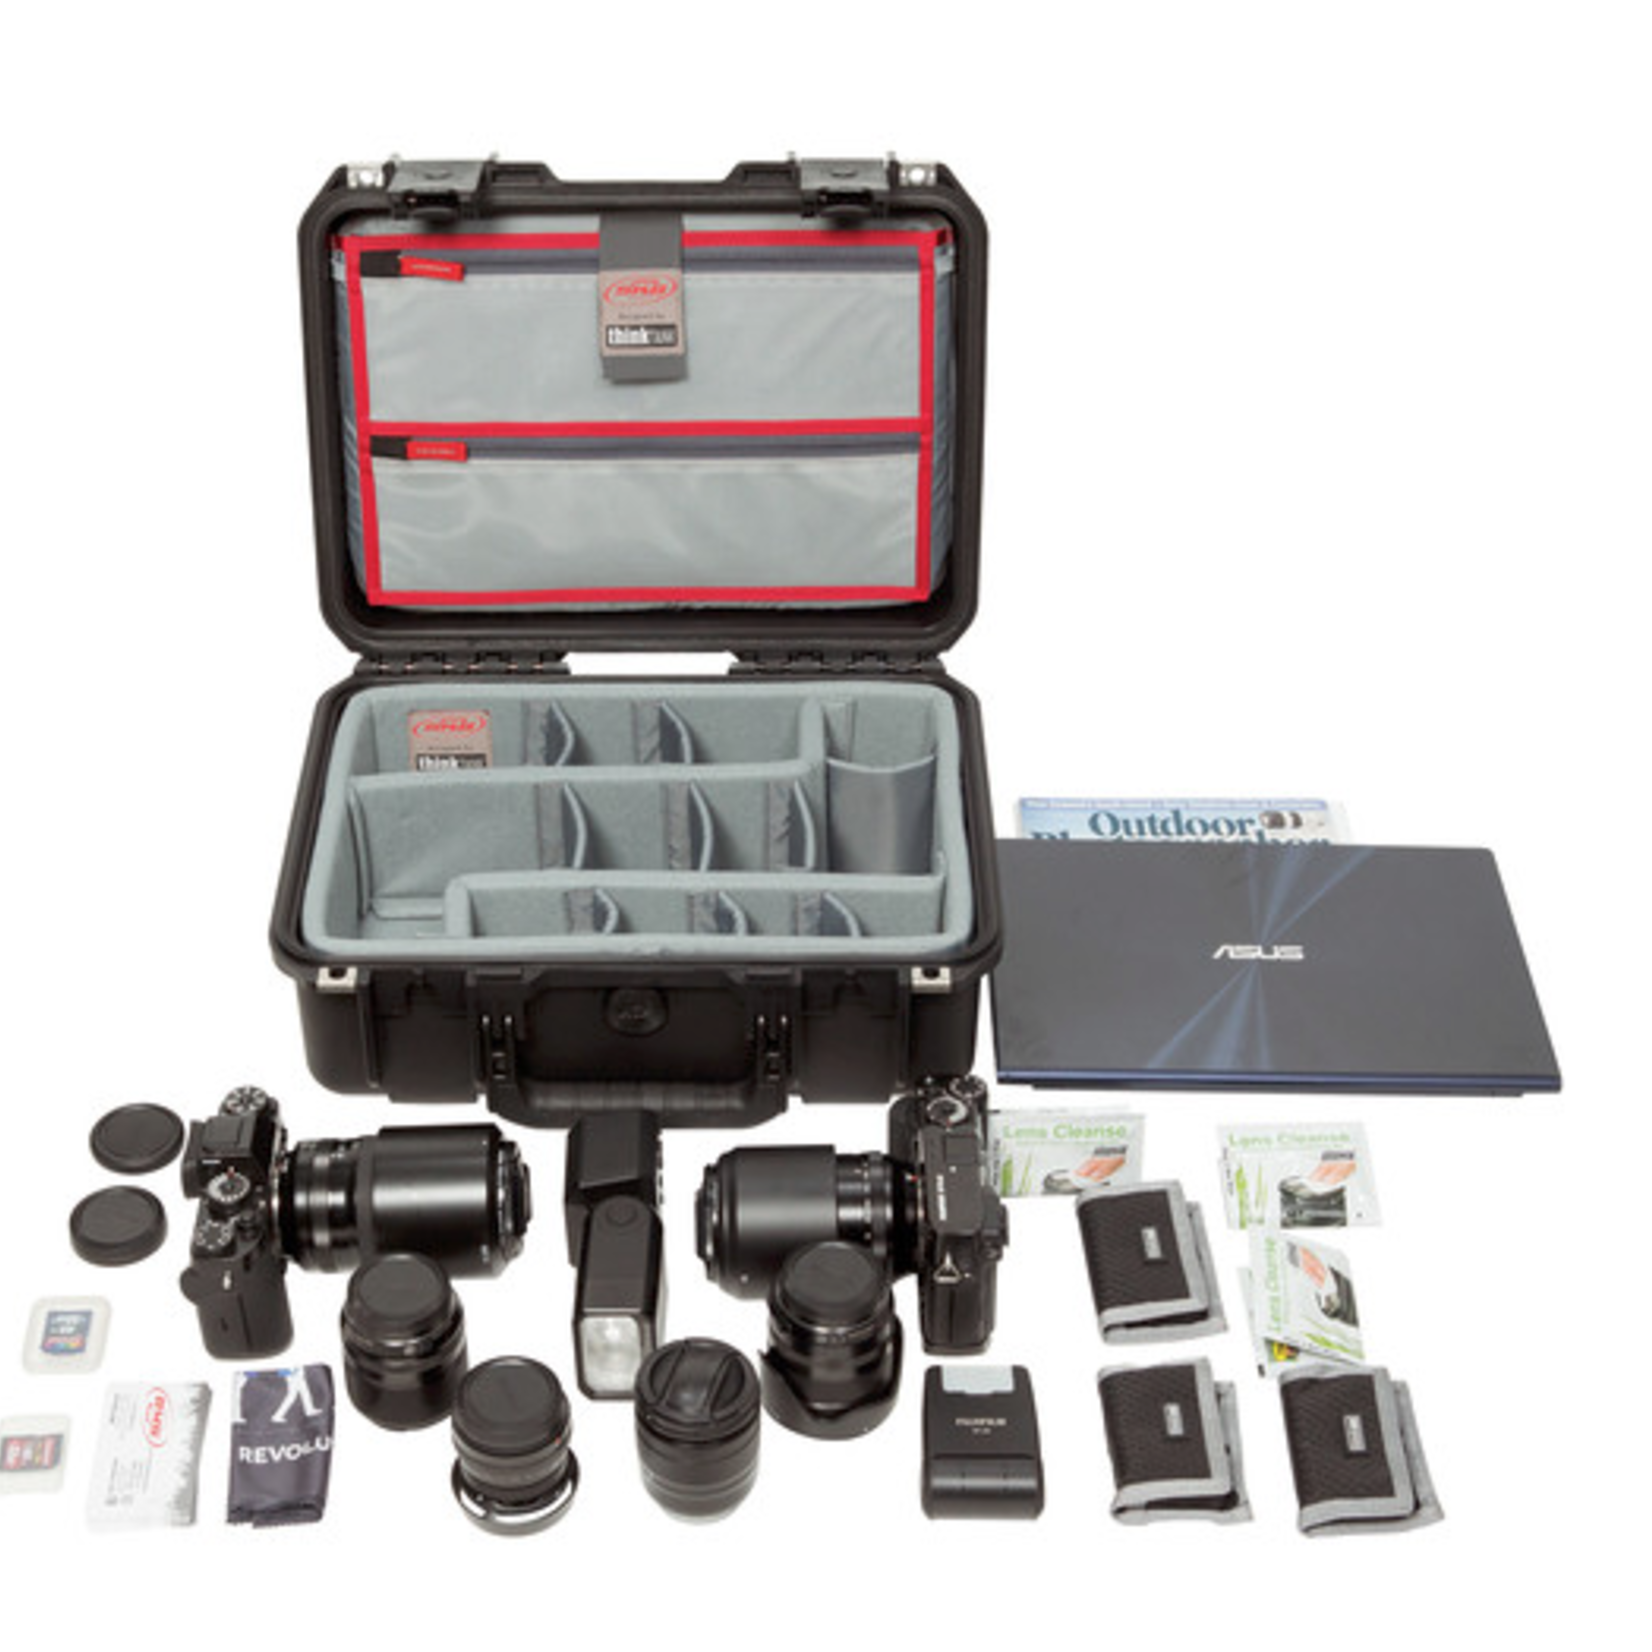 SKB Cases SKB iSeries 1510-6 Case with Think Tank Photo Dividers & Lid Organizer (Black)